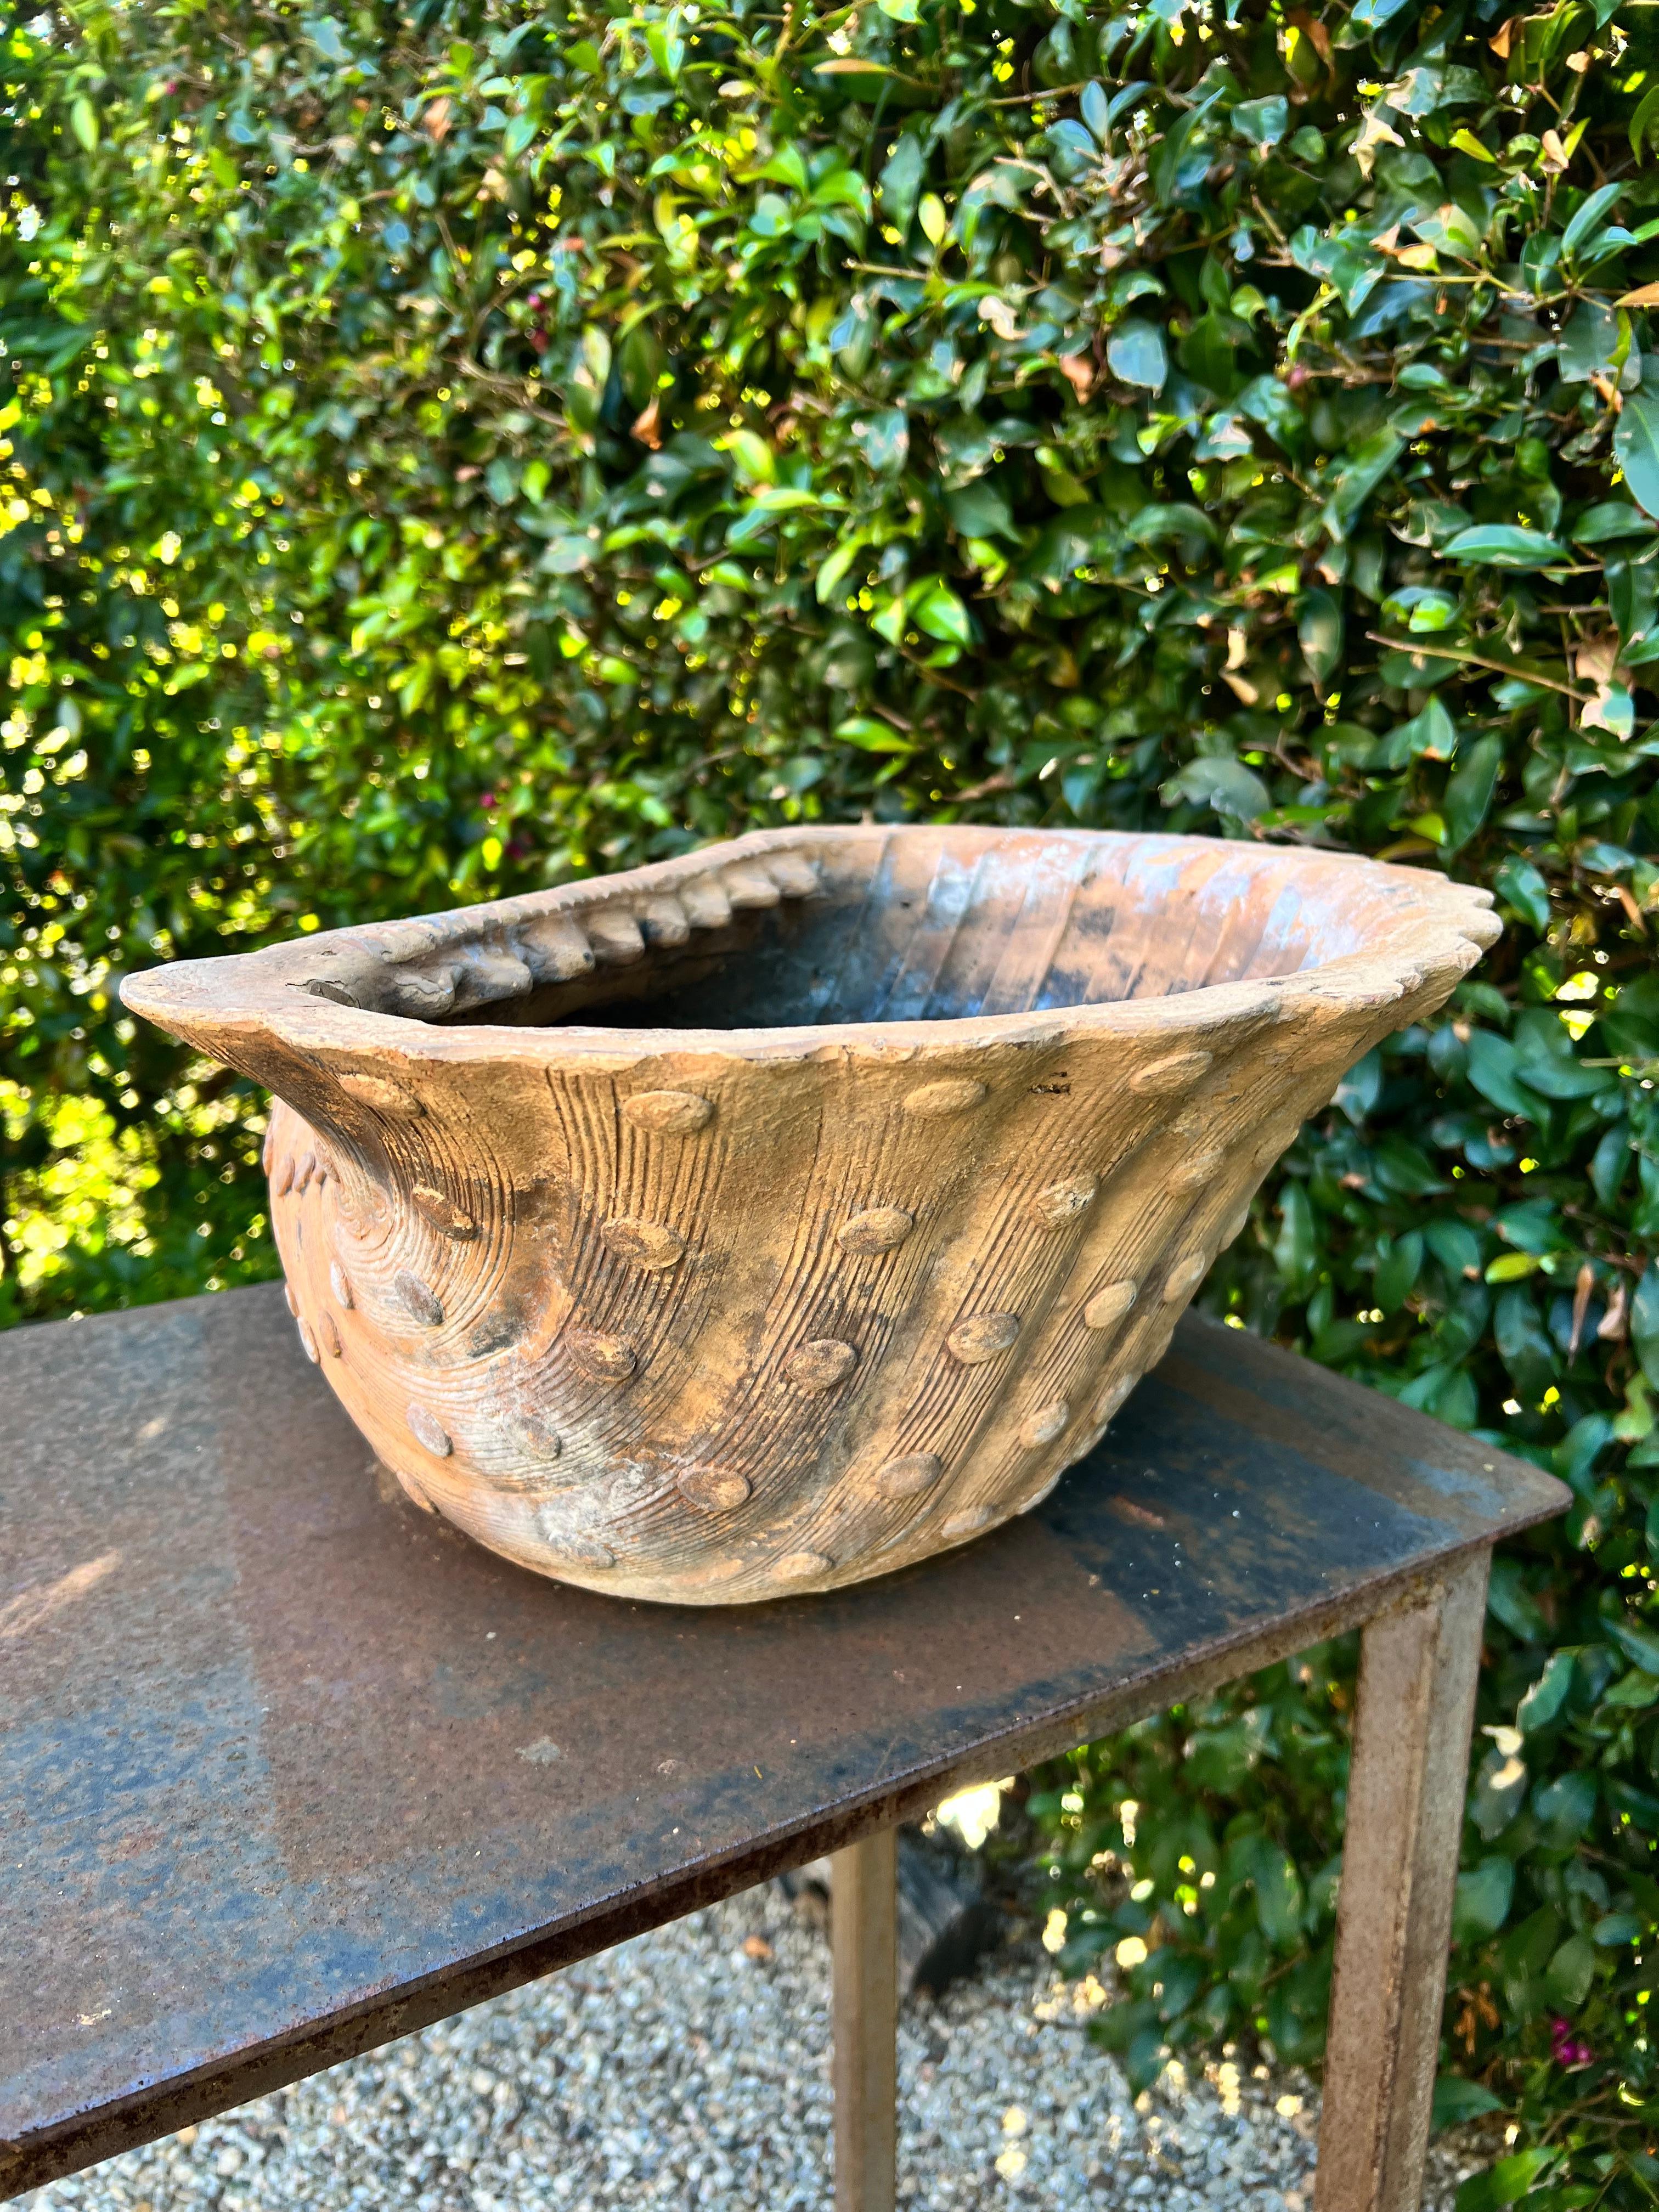 Hand-Crafted French Terracotta Grotto Shell Shaped Planter or Jardiniere For Sale